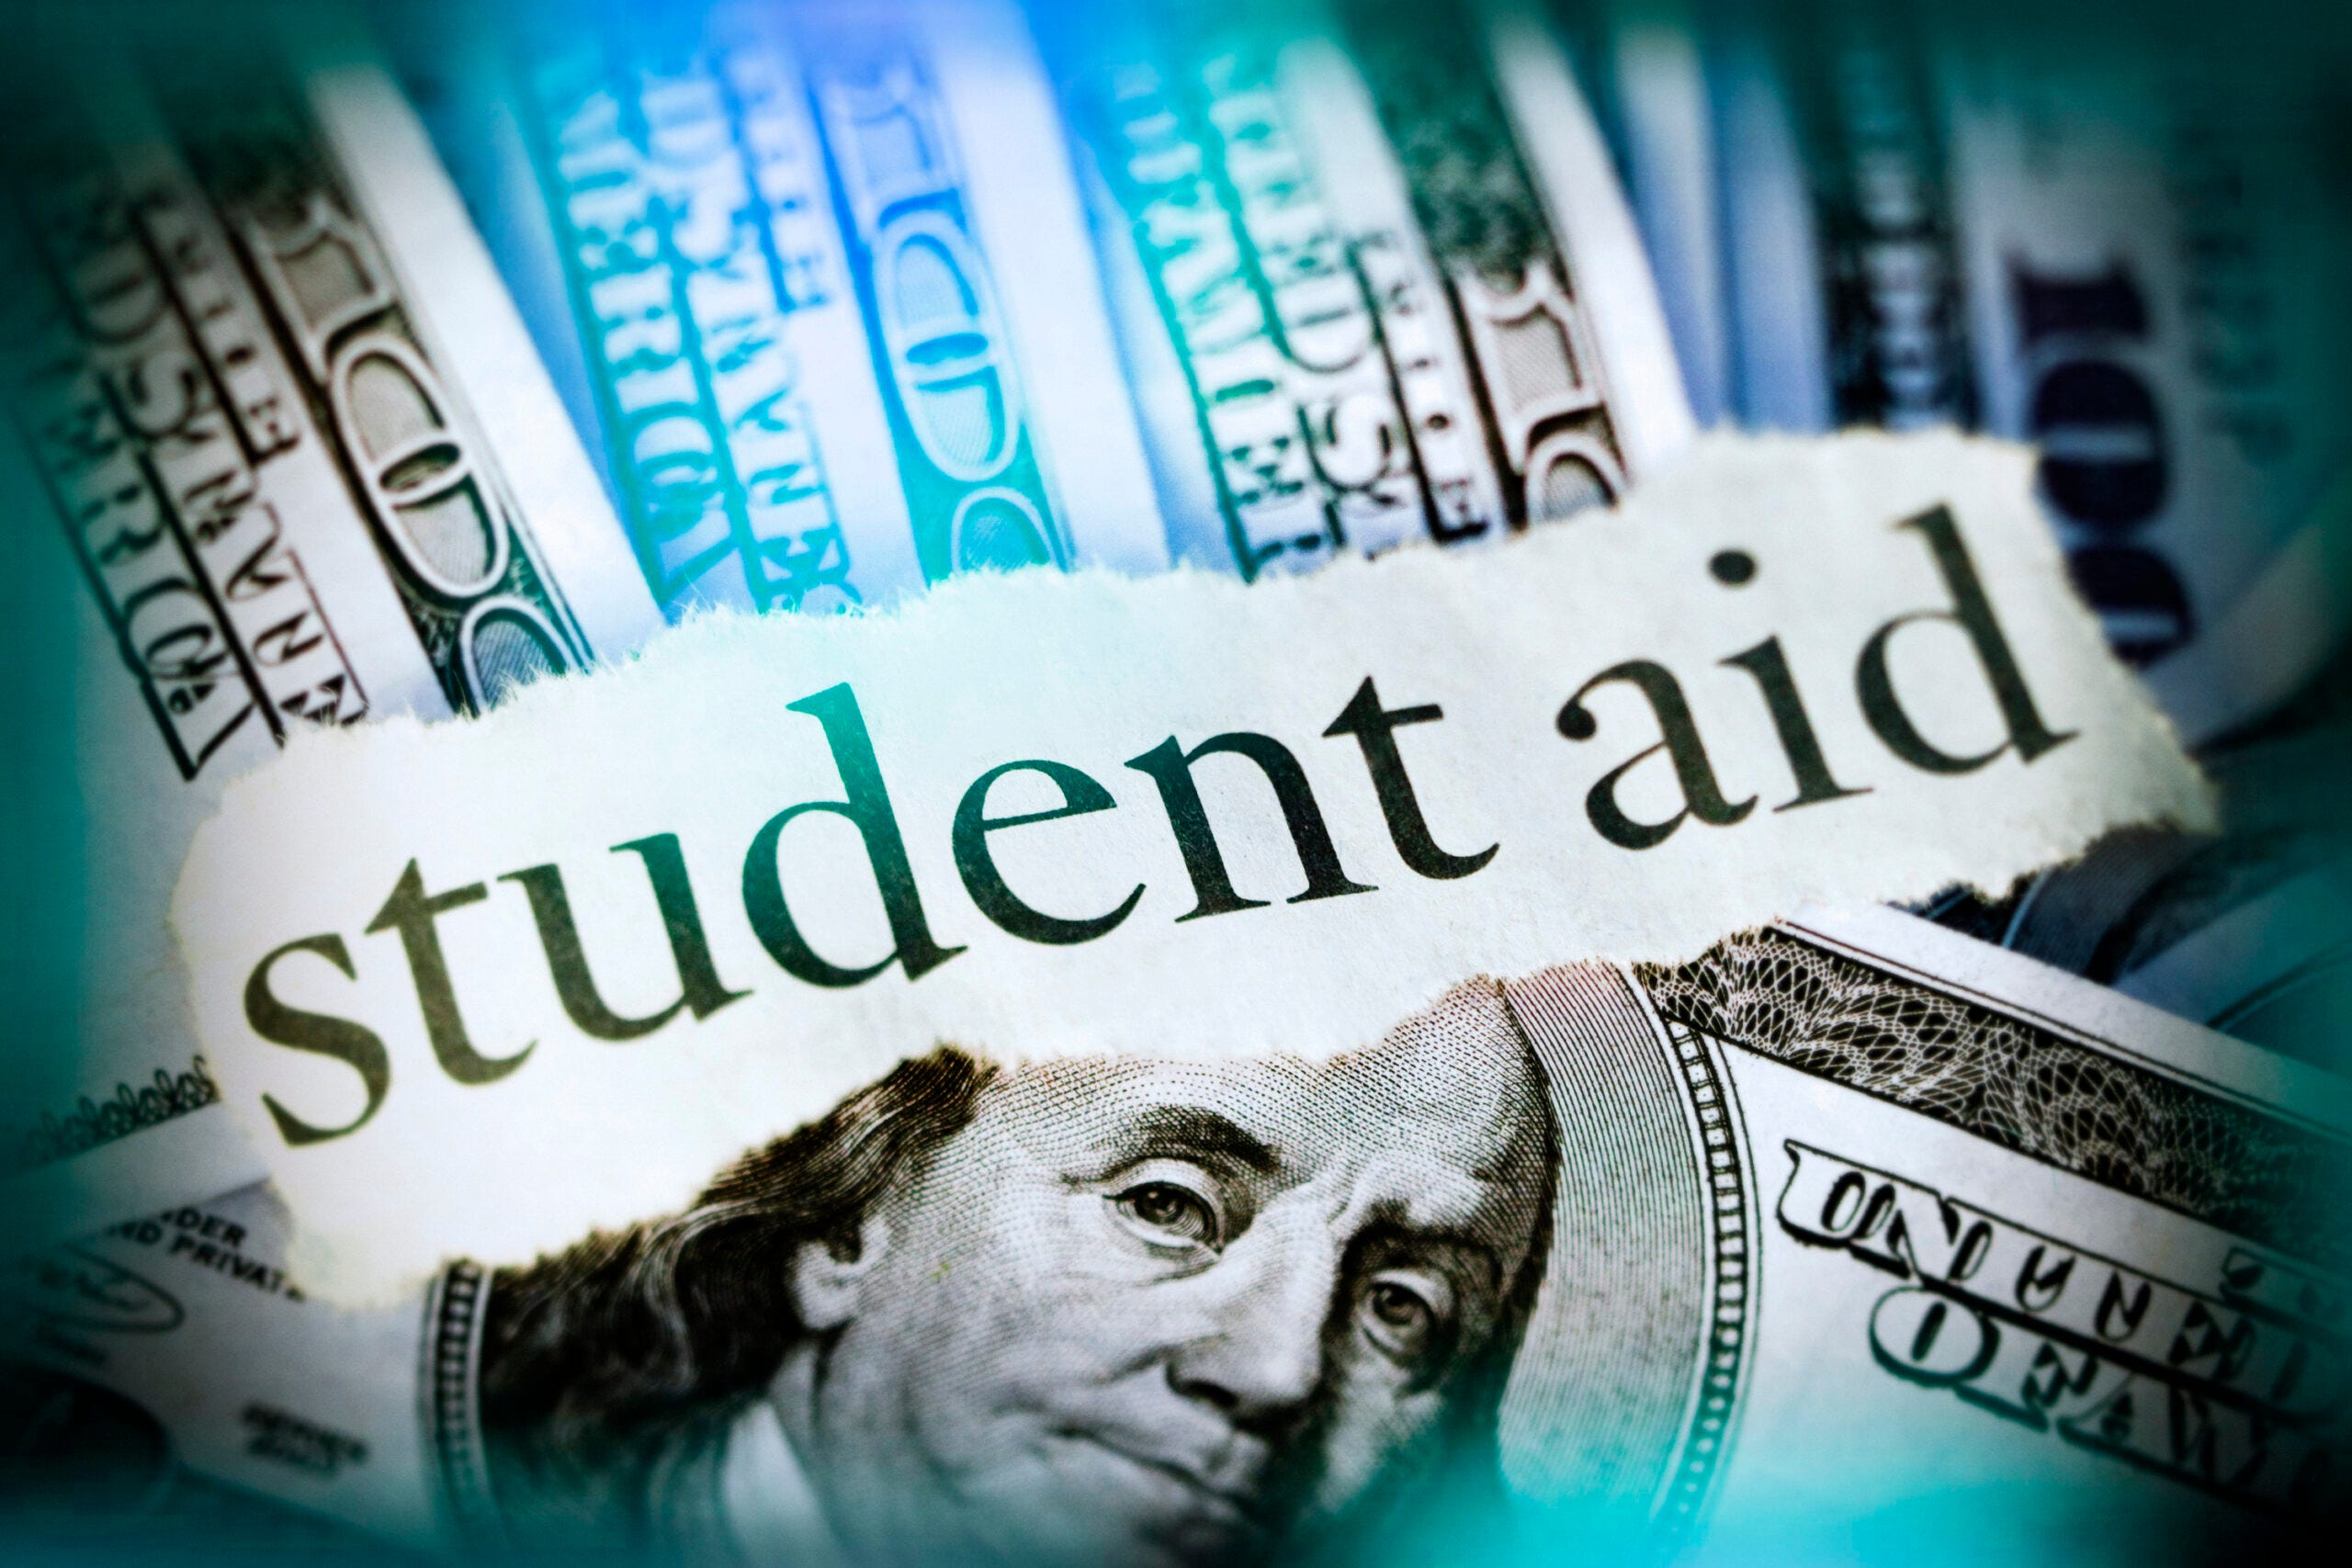 Student Loan Forgiveness Deadline: Just 2 Days Left to Consolidate Your Student Loans